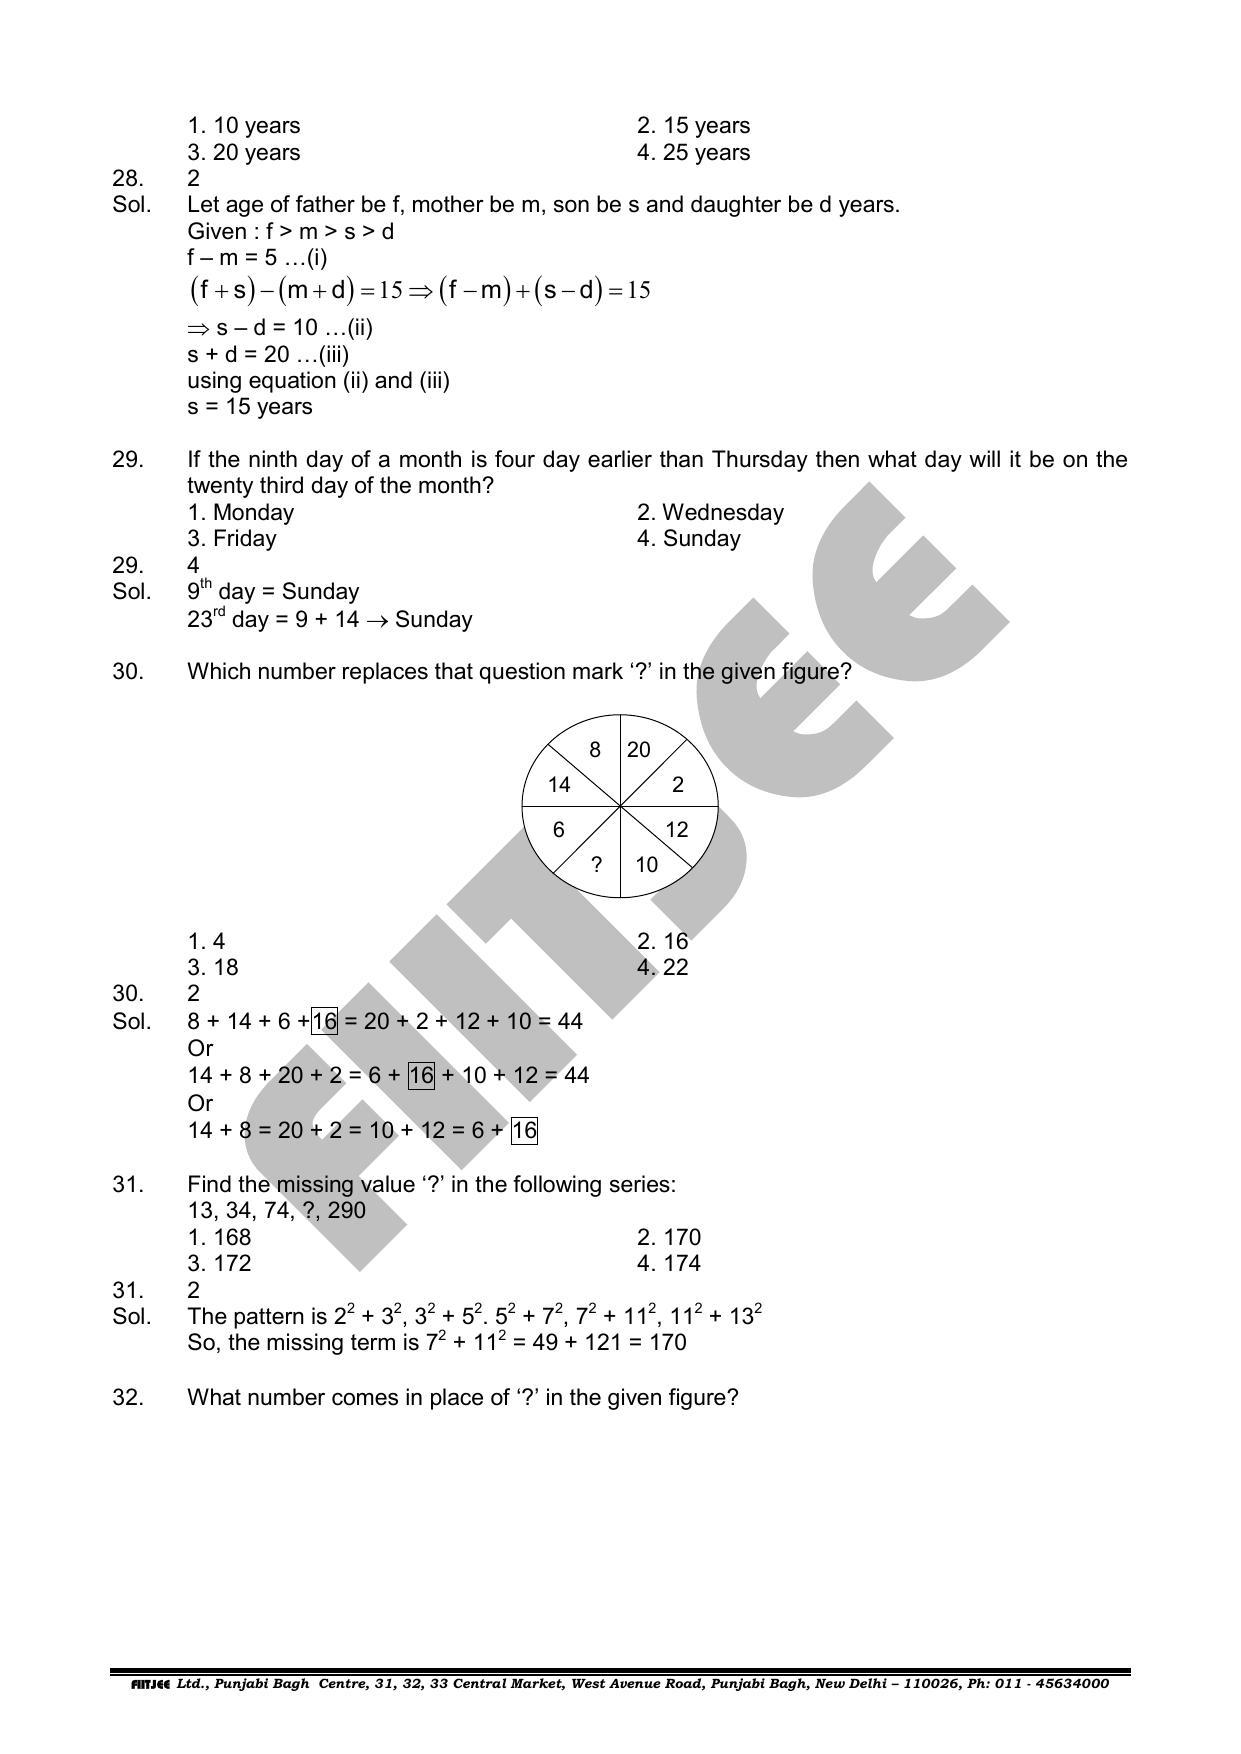 NTSE 2019 (Stage II) MAT Question Paper with Solution (June 16, 2019) - Page 11